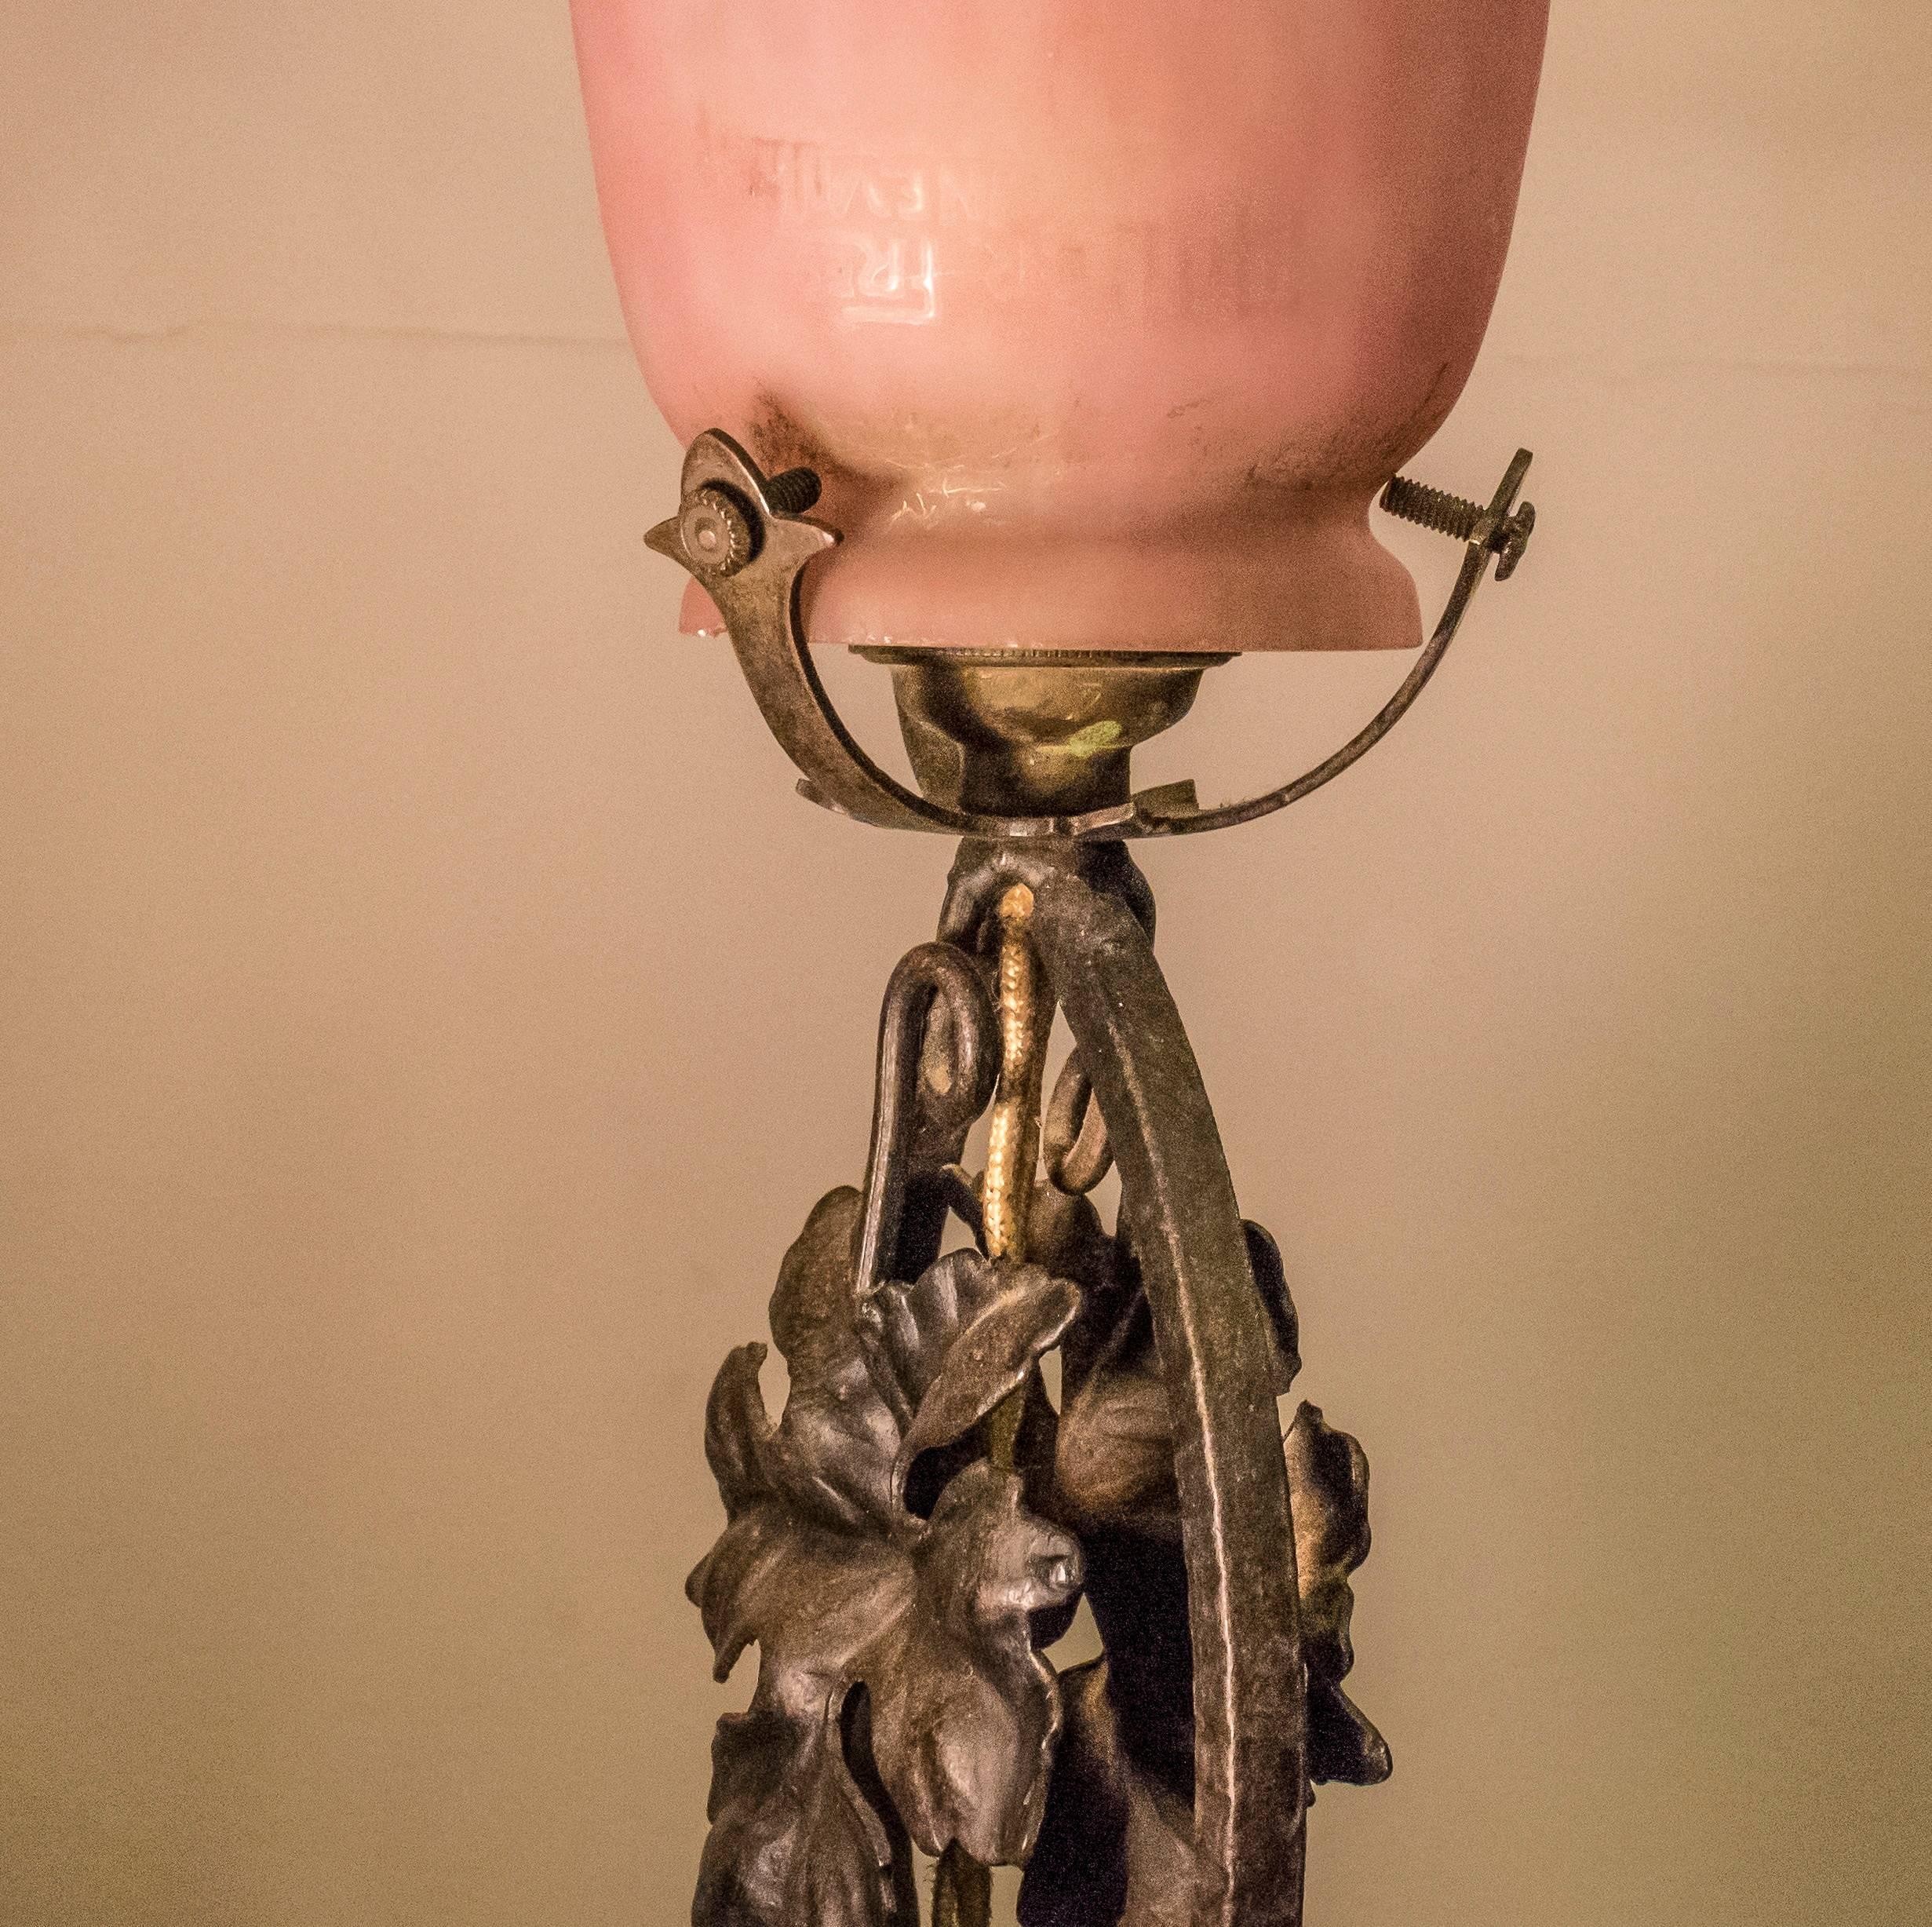 Art Nouveau rose and mauve glass lamp by Luneville Freres, signed.
A exquisite and one of a kind table lamp, circa 1910 from France. In a perfect condition.